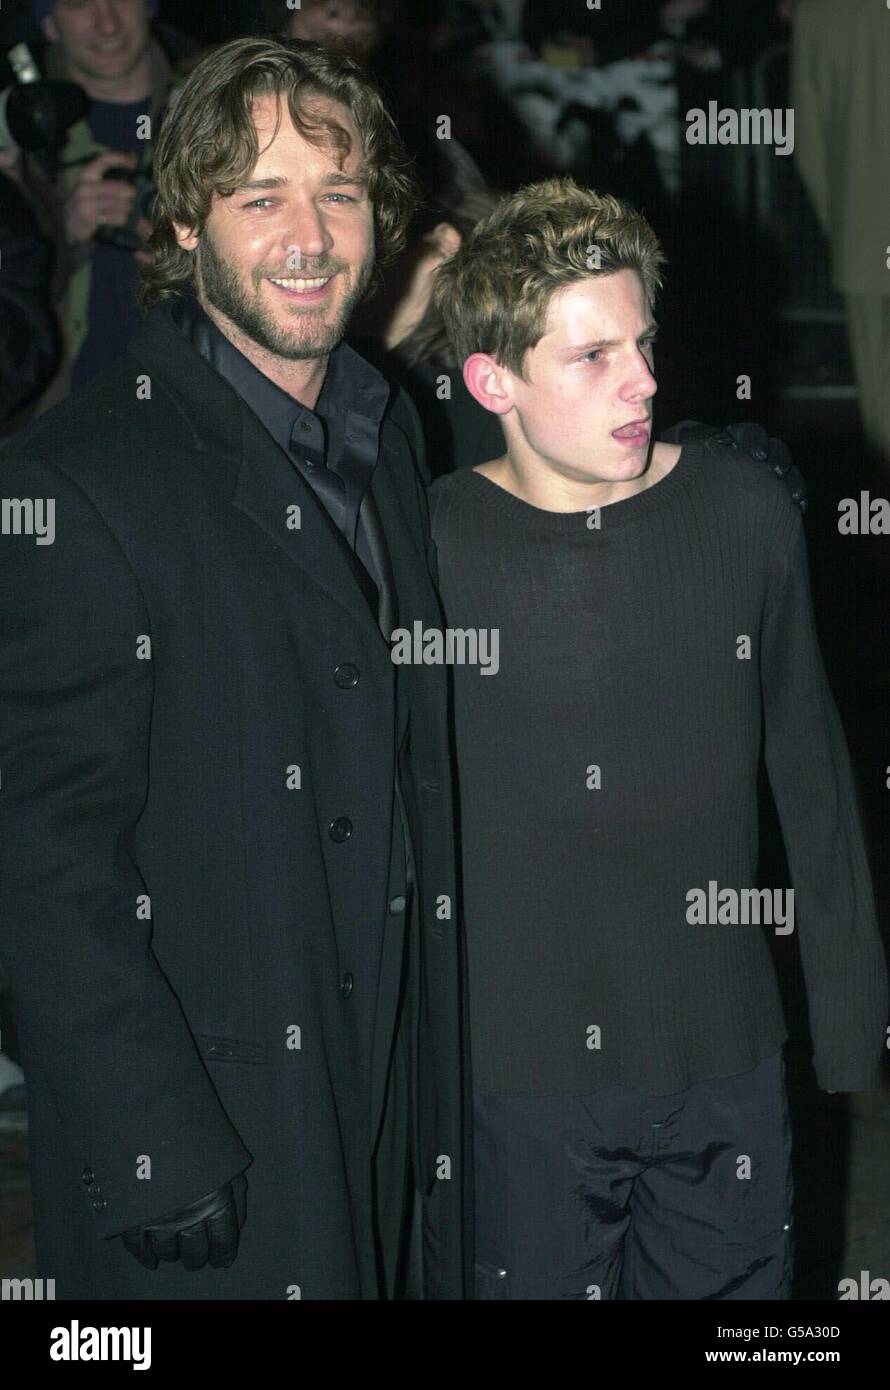 New Zealand actor Russell Crowe (left), with British actor Jamie Bell, arriving for the premiere of 'Proof of Life' at the Warner West End in London's Leicester Square. Stock Photo